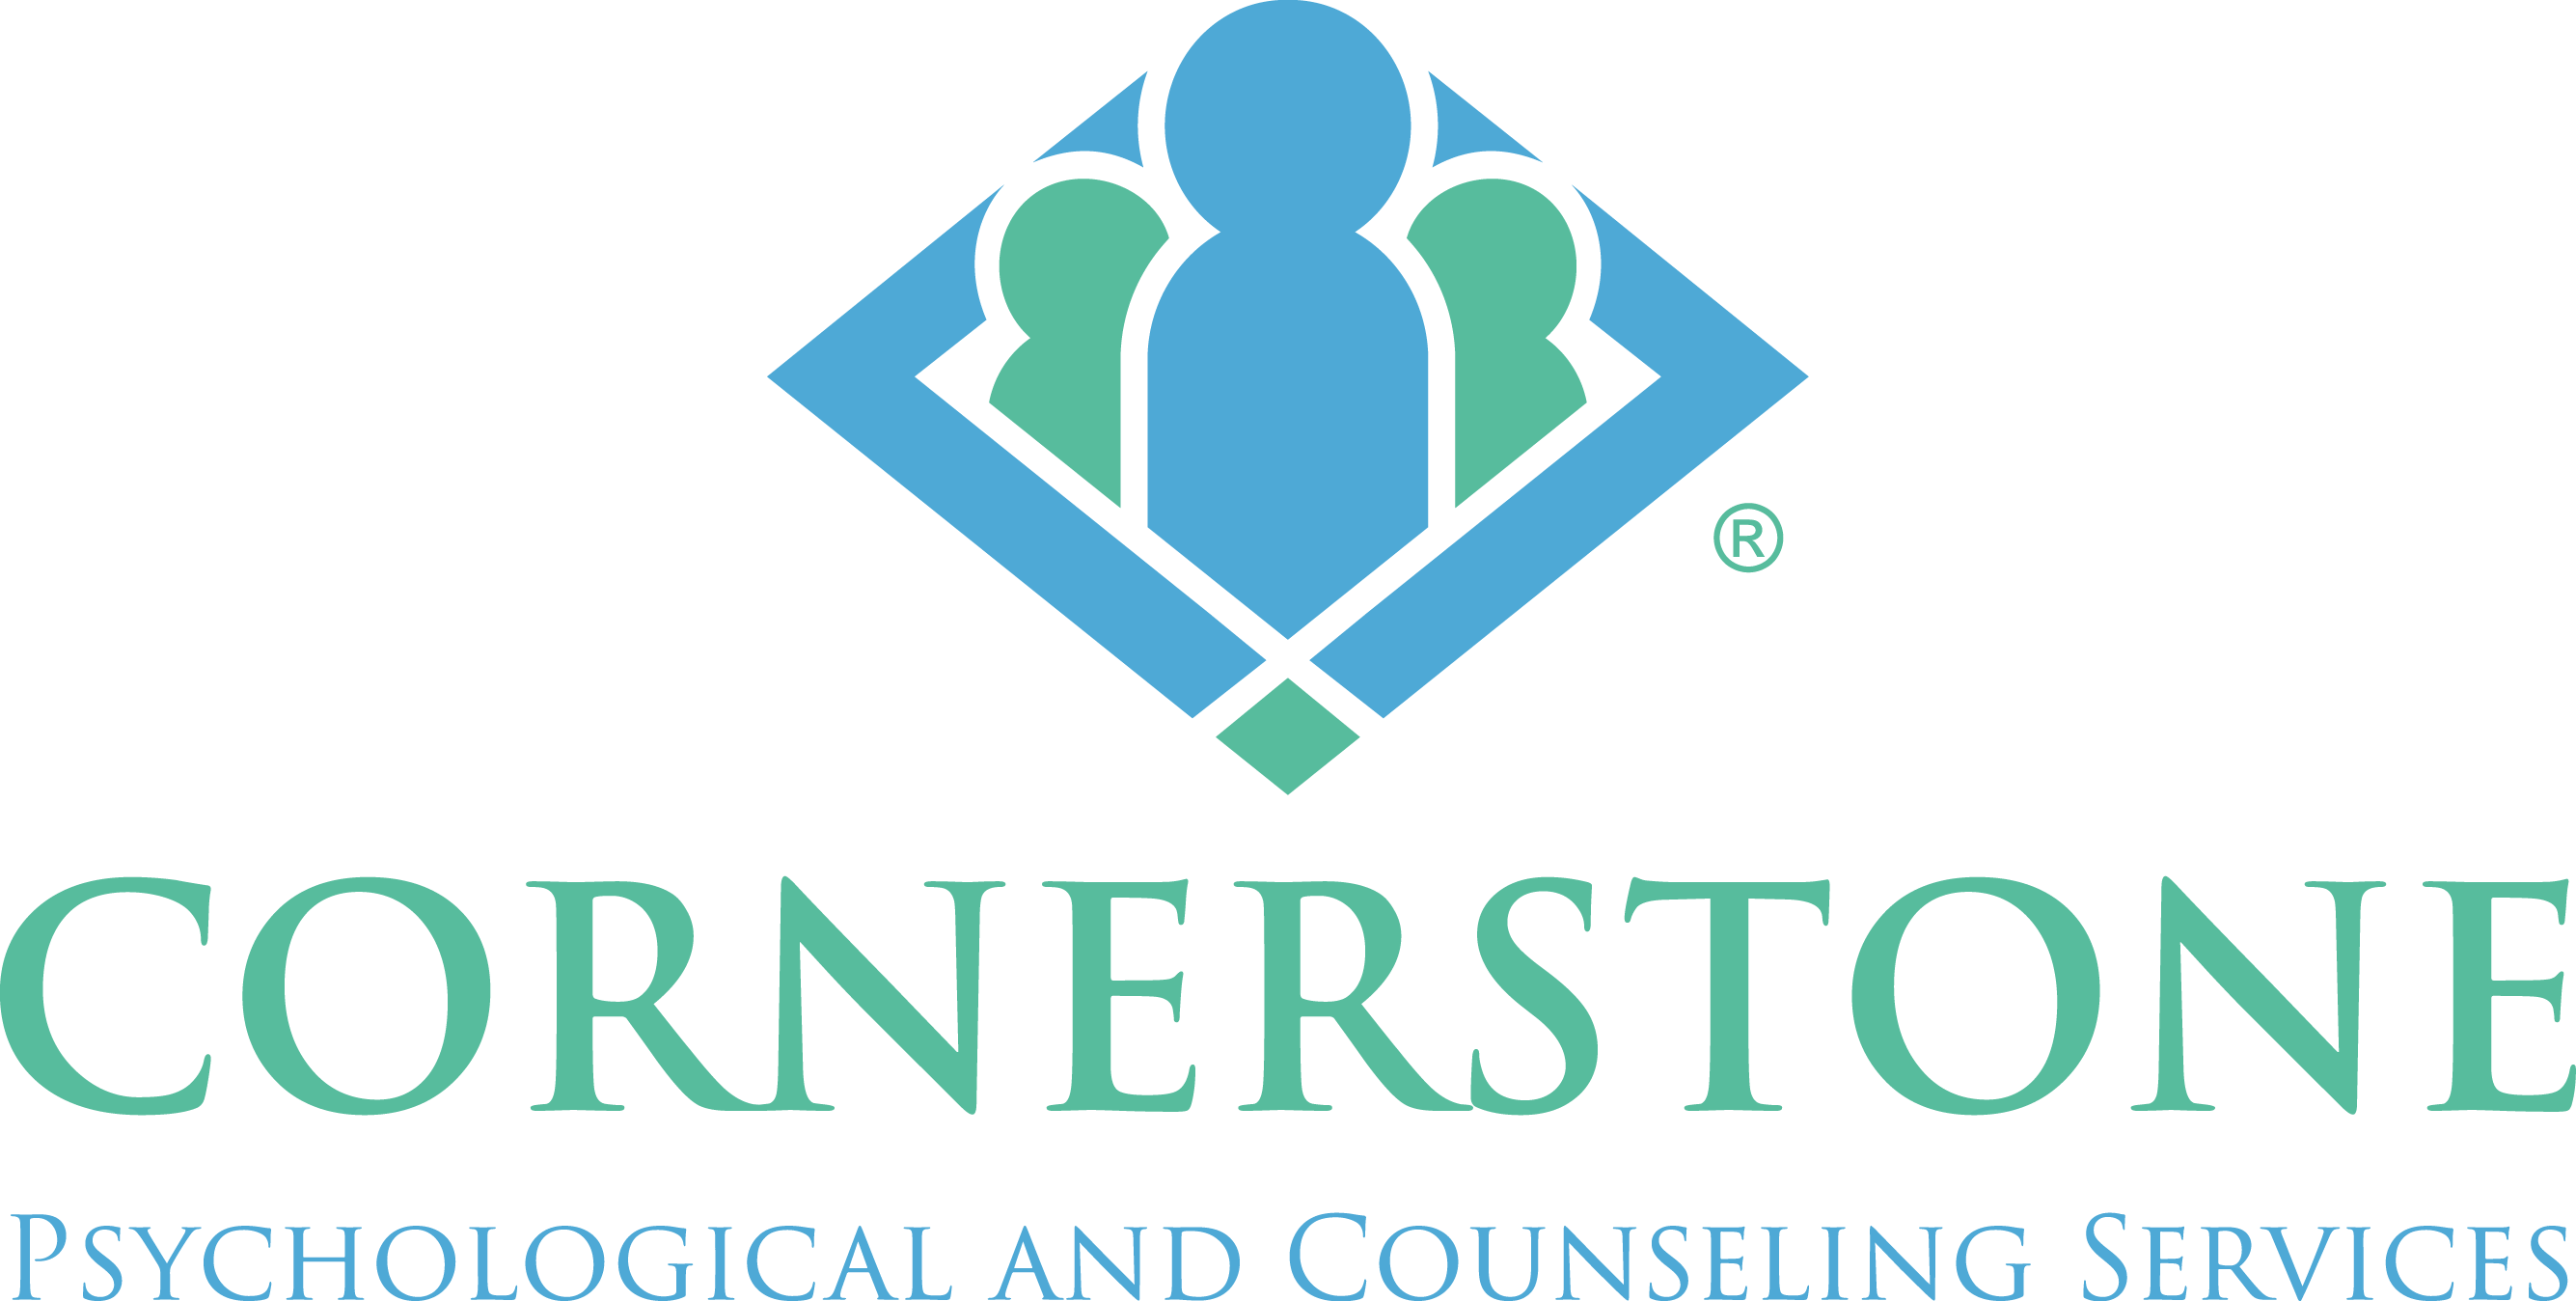 Cornerstone Psychological And Counseling Services